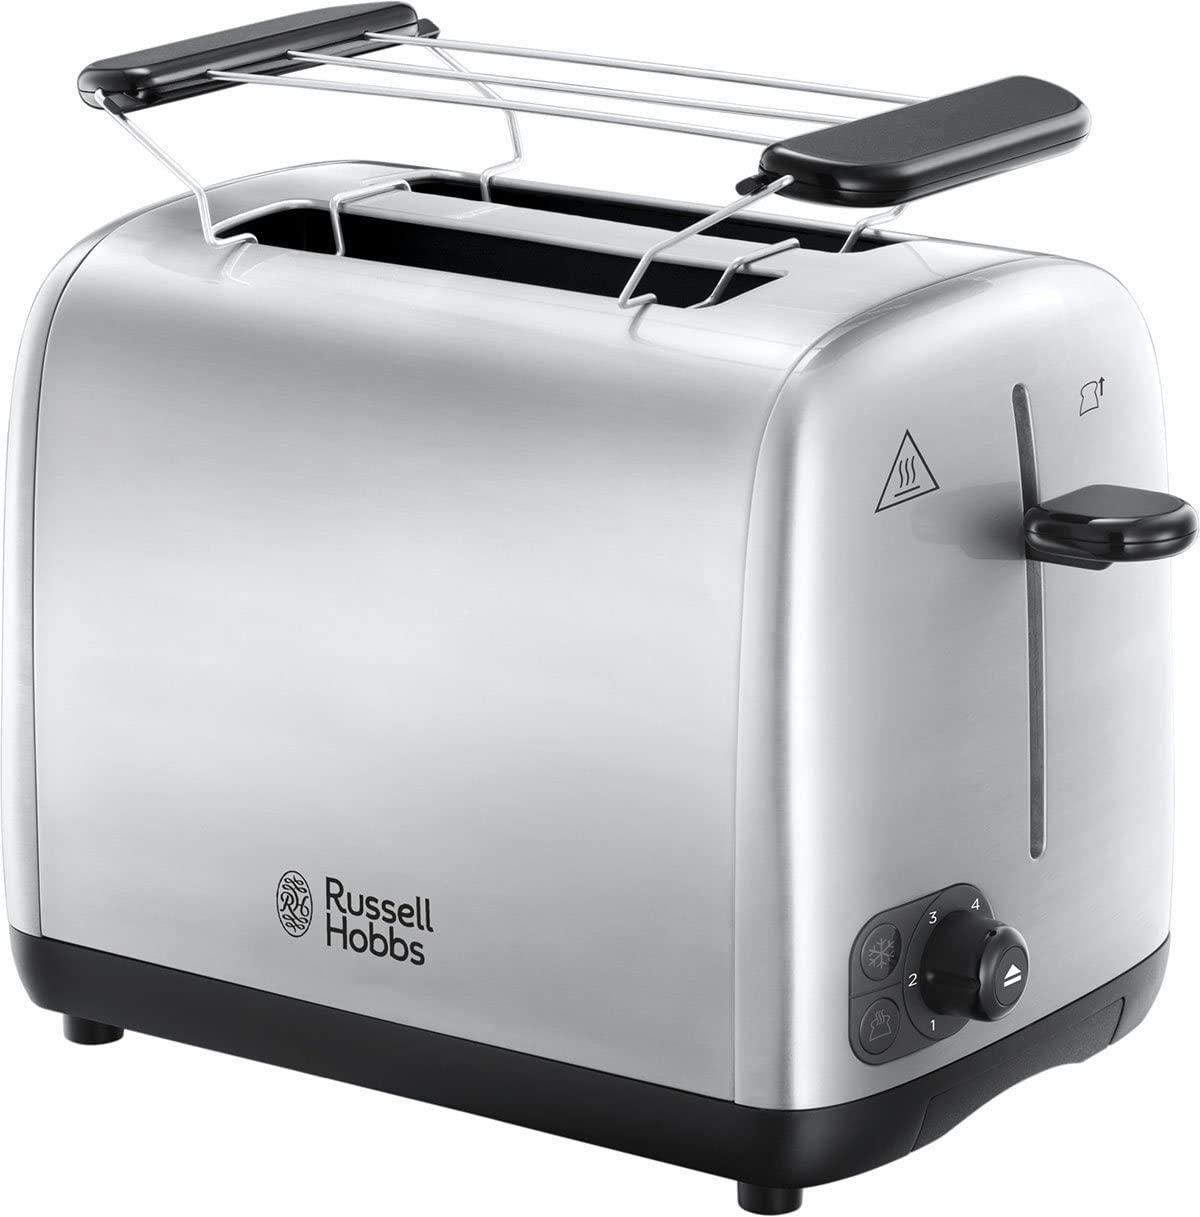 Russell Hobs Toaster, 2 Slots, Red Indicator Lights, Stainless Steel, RHB-2408056